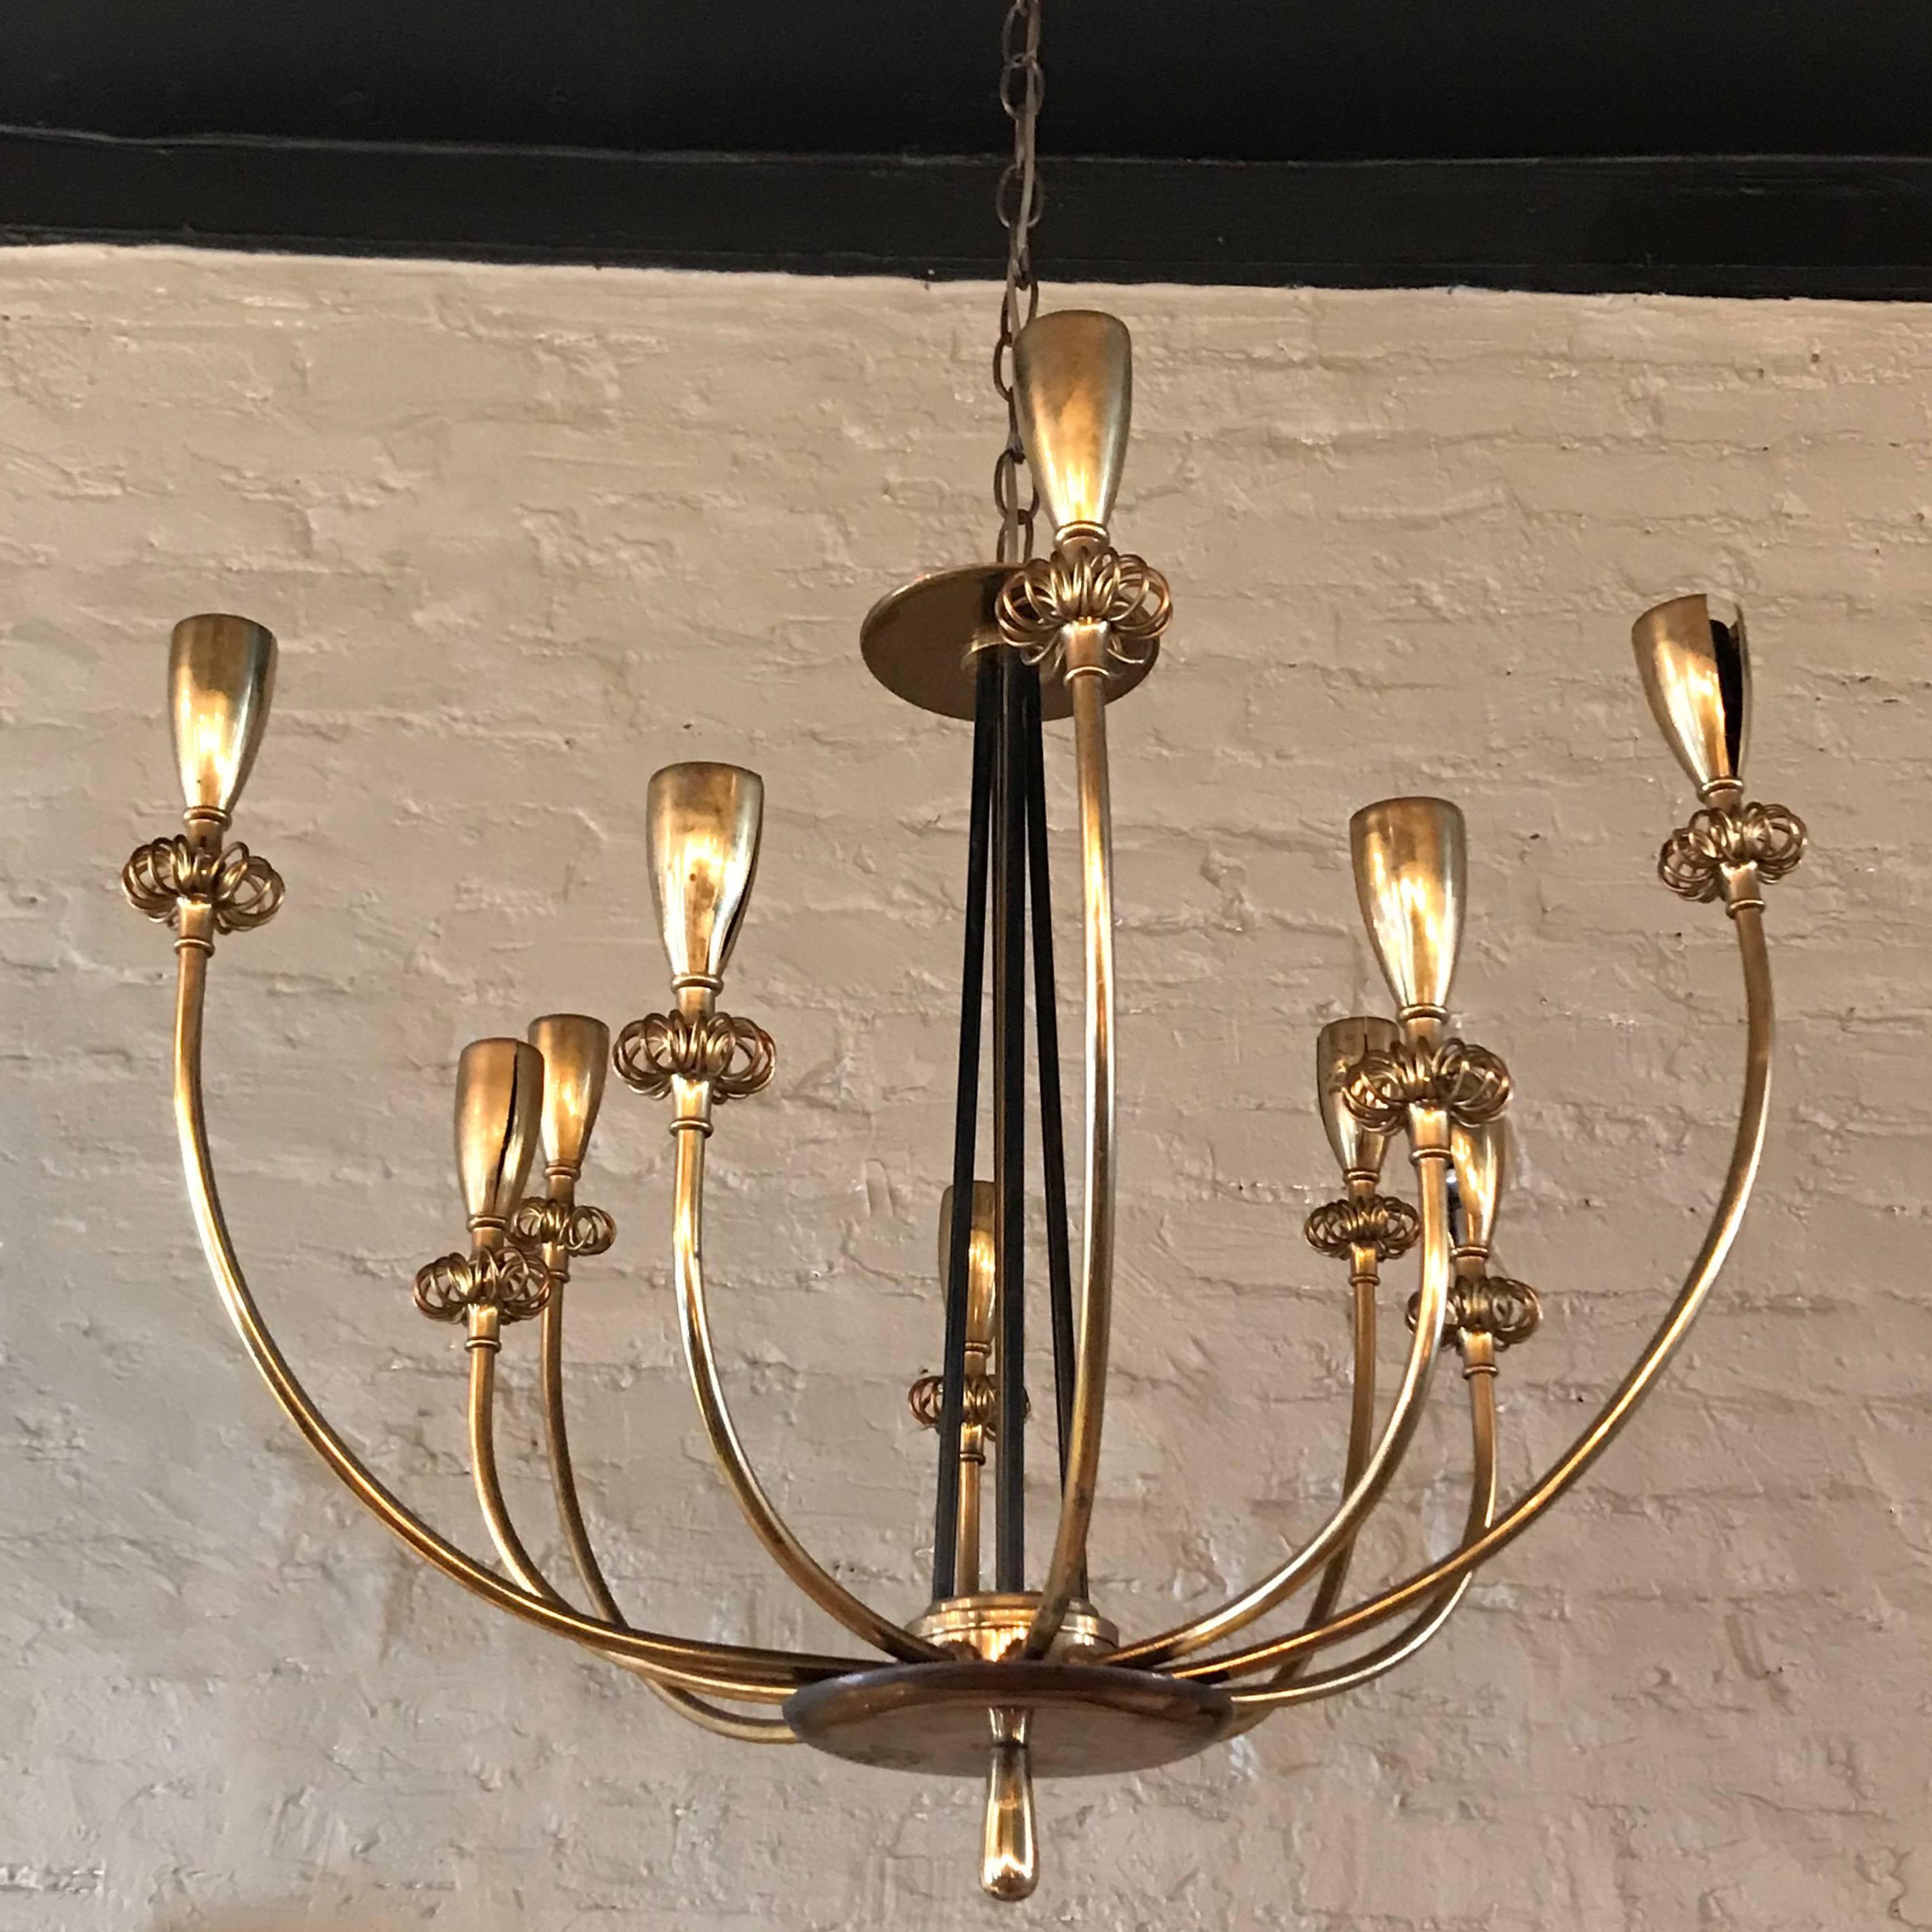 Finnish Brass Floral Ten-Arm Flush Mount Chandelier Fixture by Paavo Tynell